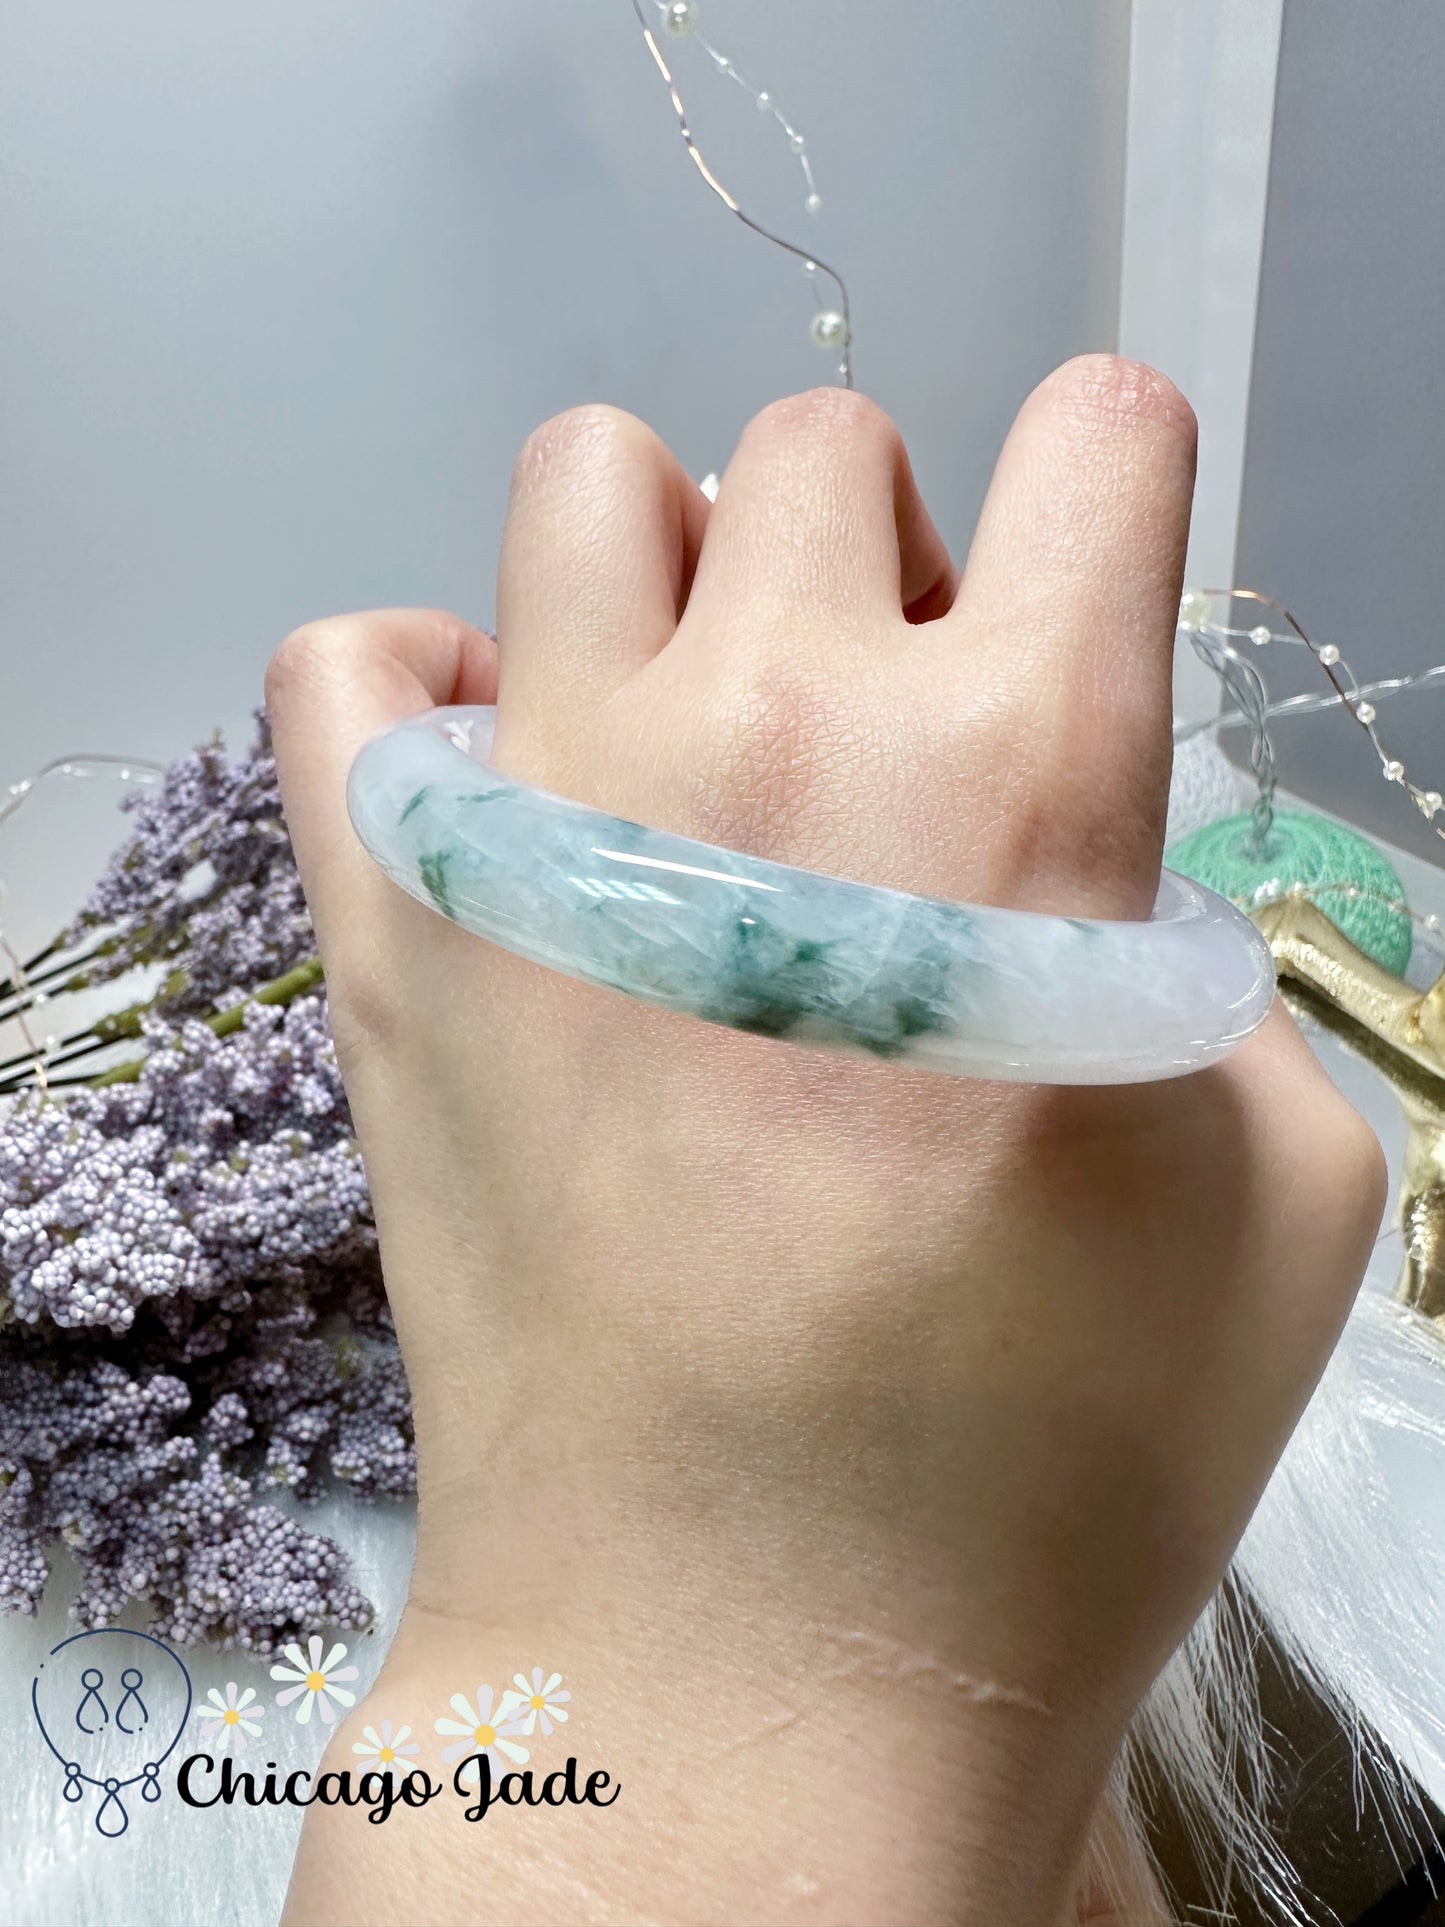 High-end moonlight translucent see-through jadeite jade feicui bangle with dark green floating flower- 56.7mm/size M/Certified